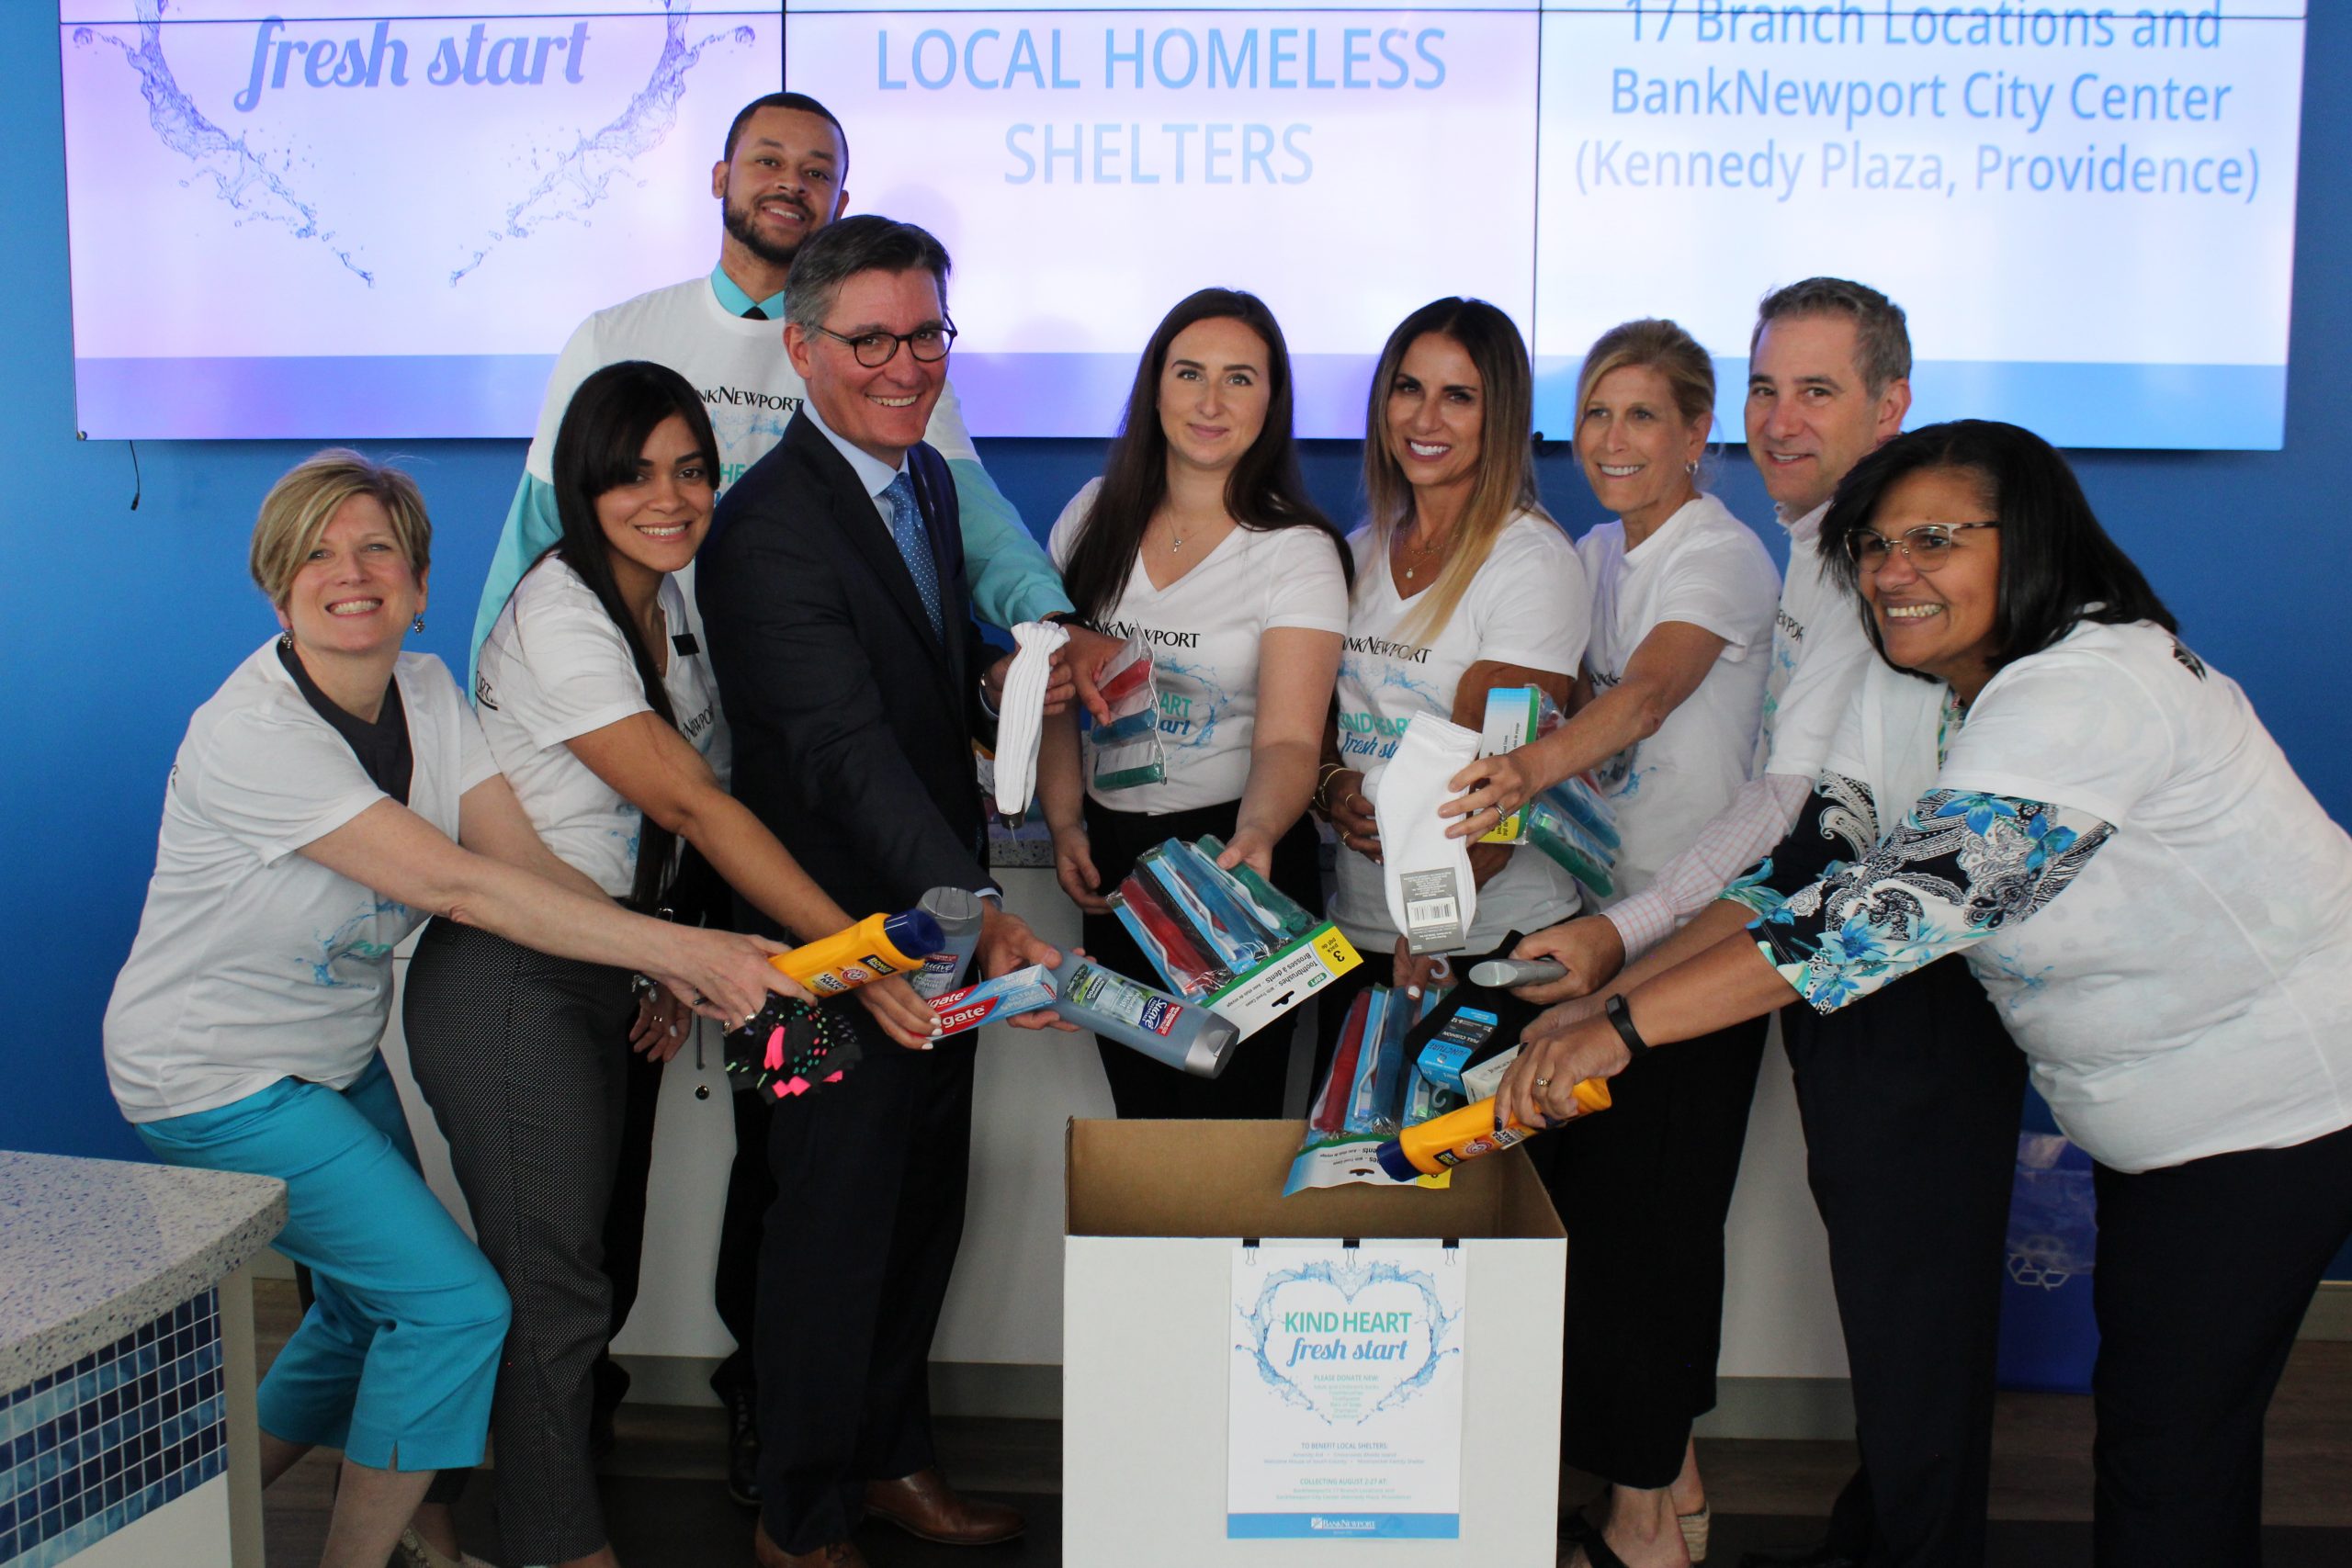 1 BankNewport team with CEO Jack Murphy Kind Heart Fresh Start collection drive Aug 2021